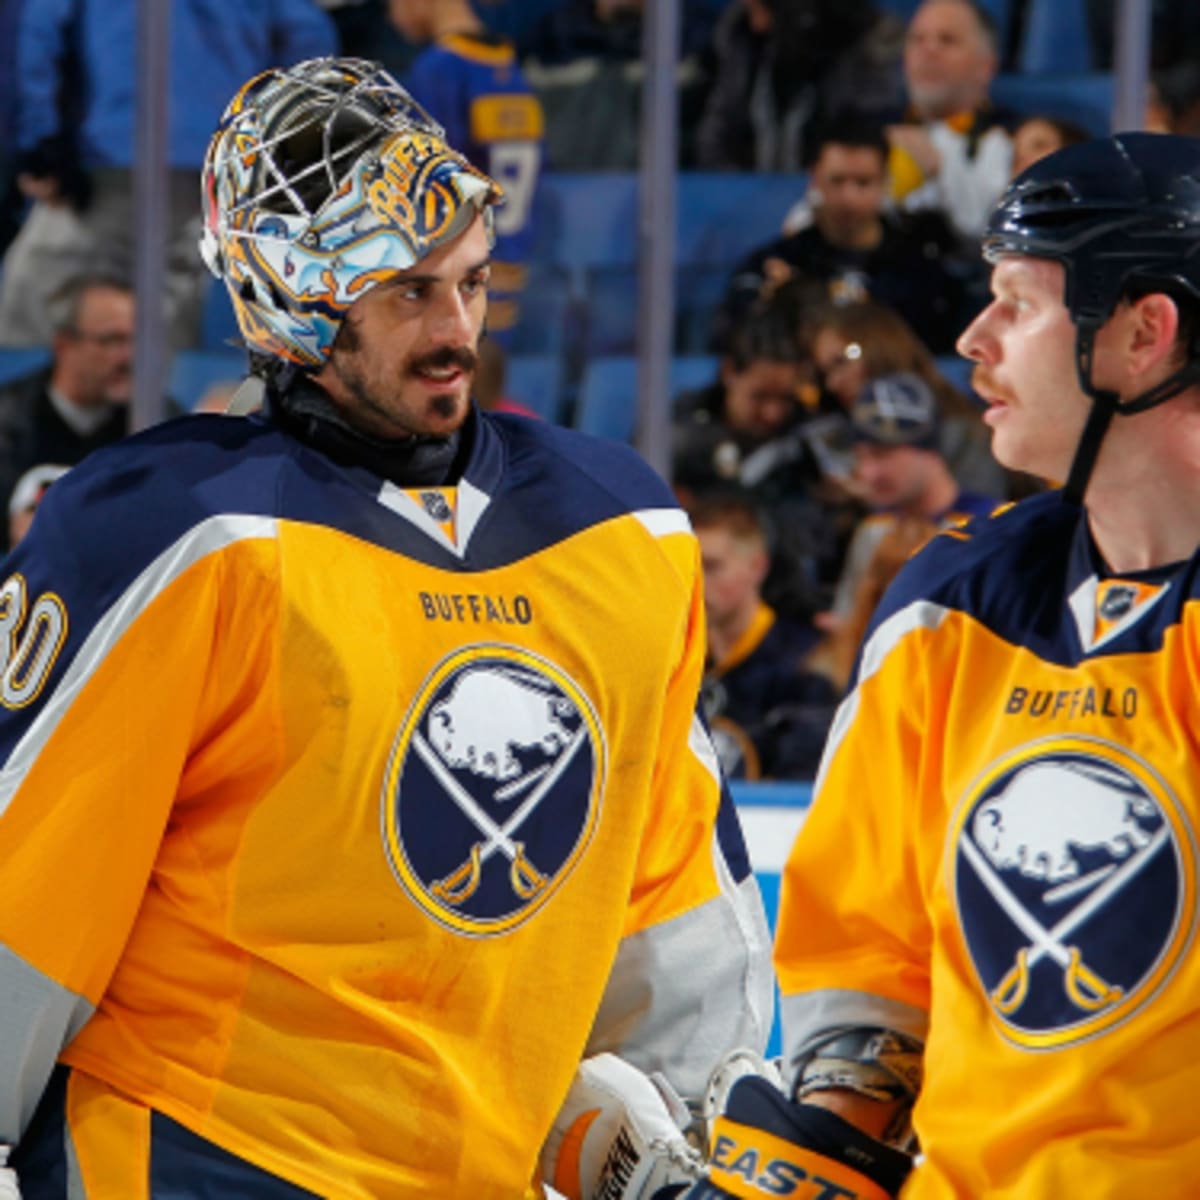 Buffalo Sabres - It's official. Ryan Miller Night is